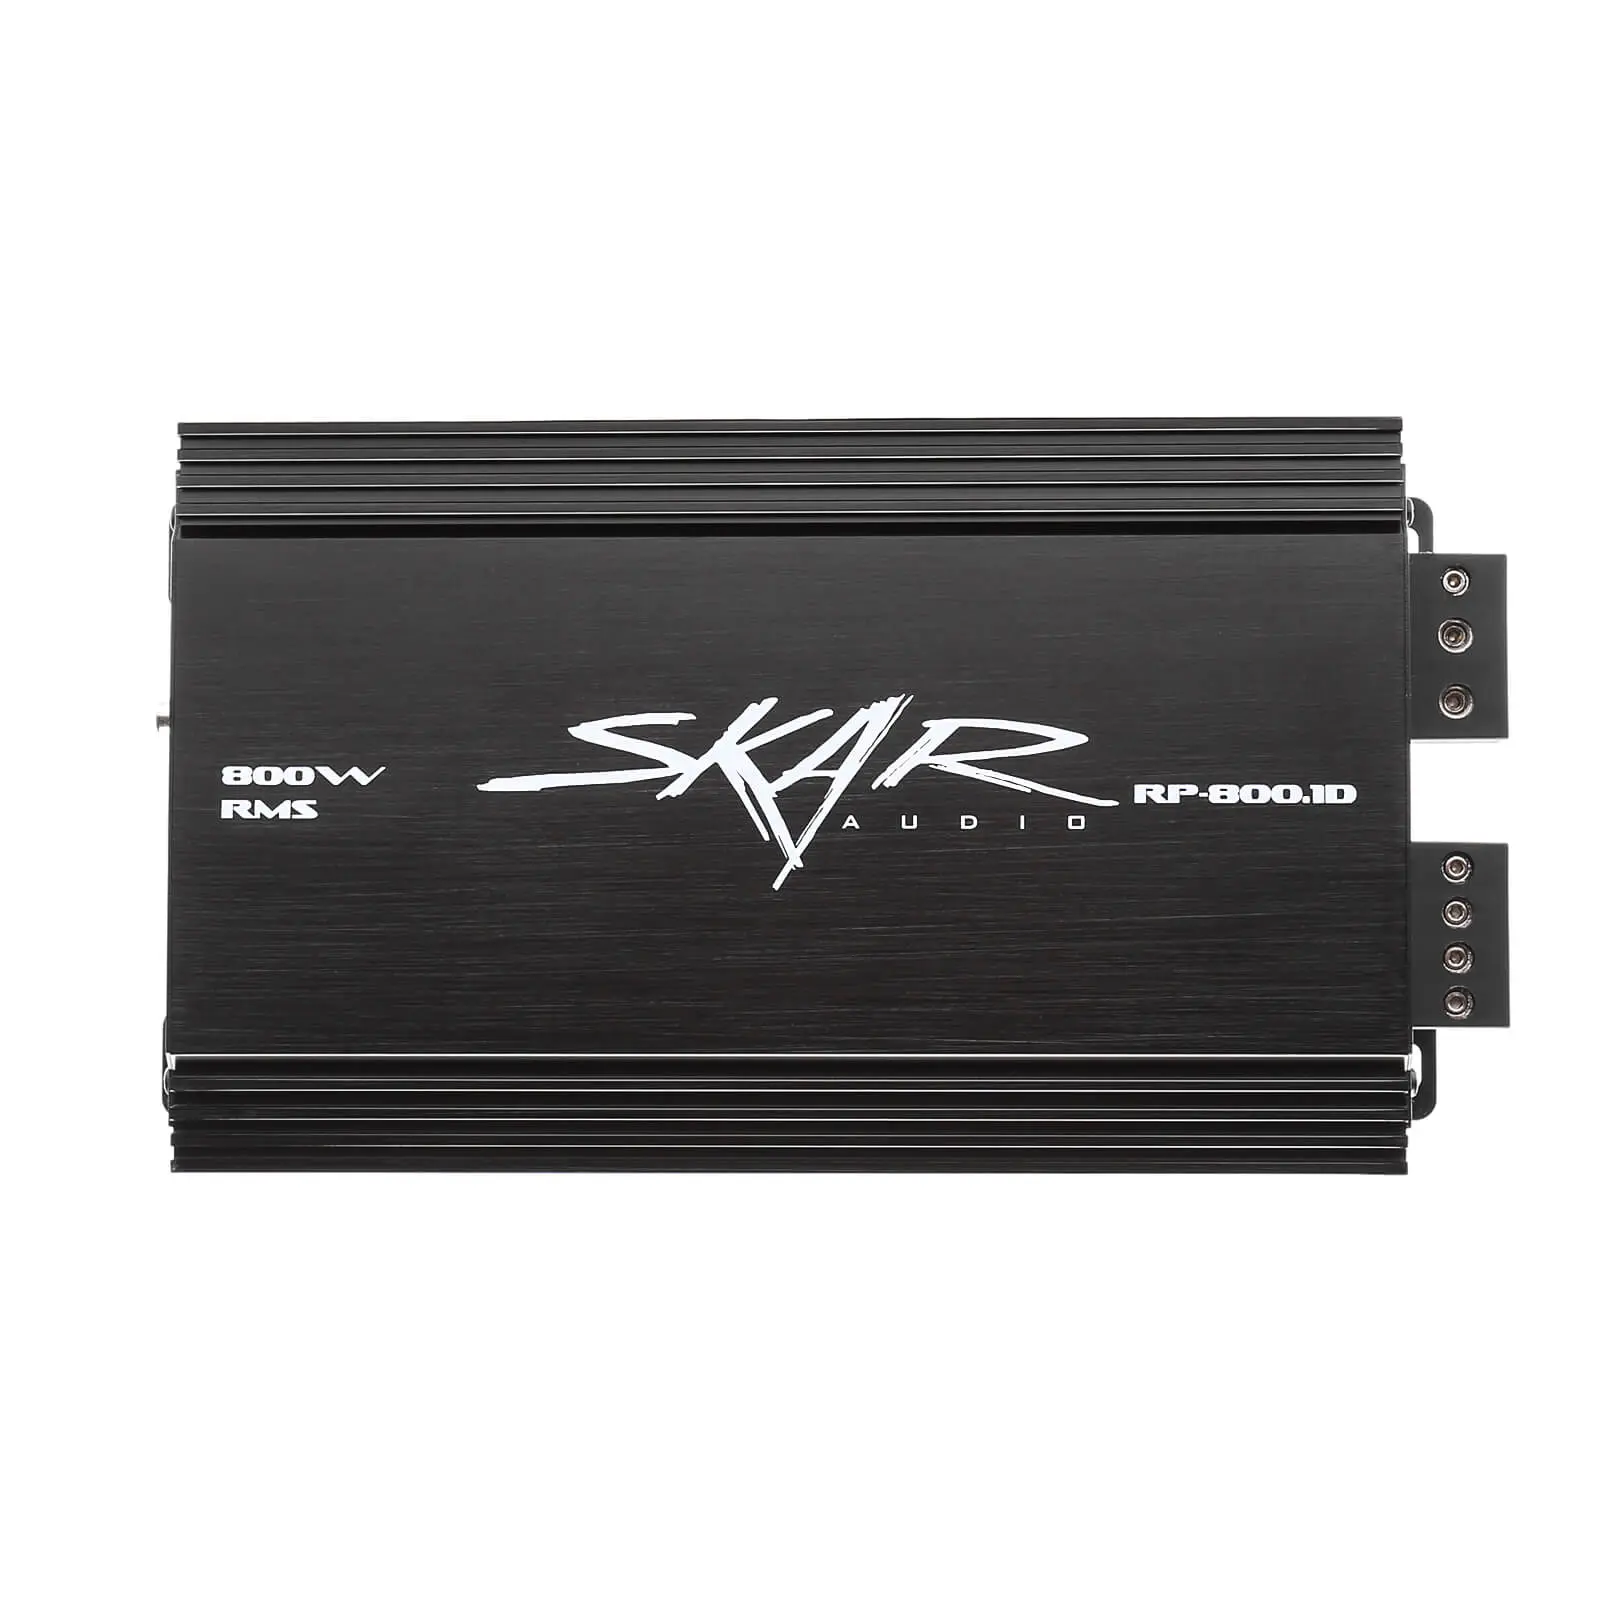 Skar Audio Single 12 Complete 1,200 Watt SDR Series Subwoofer Bass Package Includes Loaded Enclosure with Amplifier 